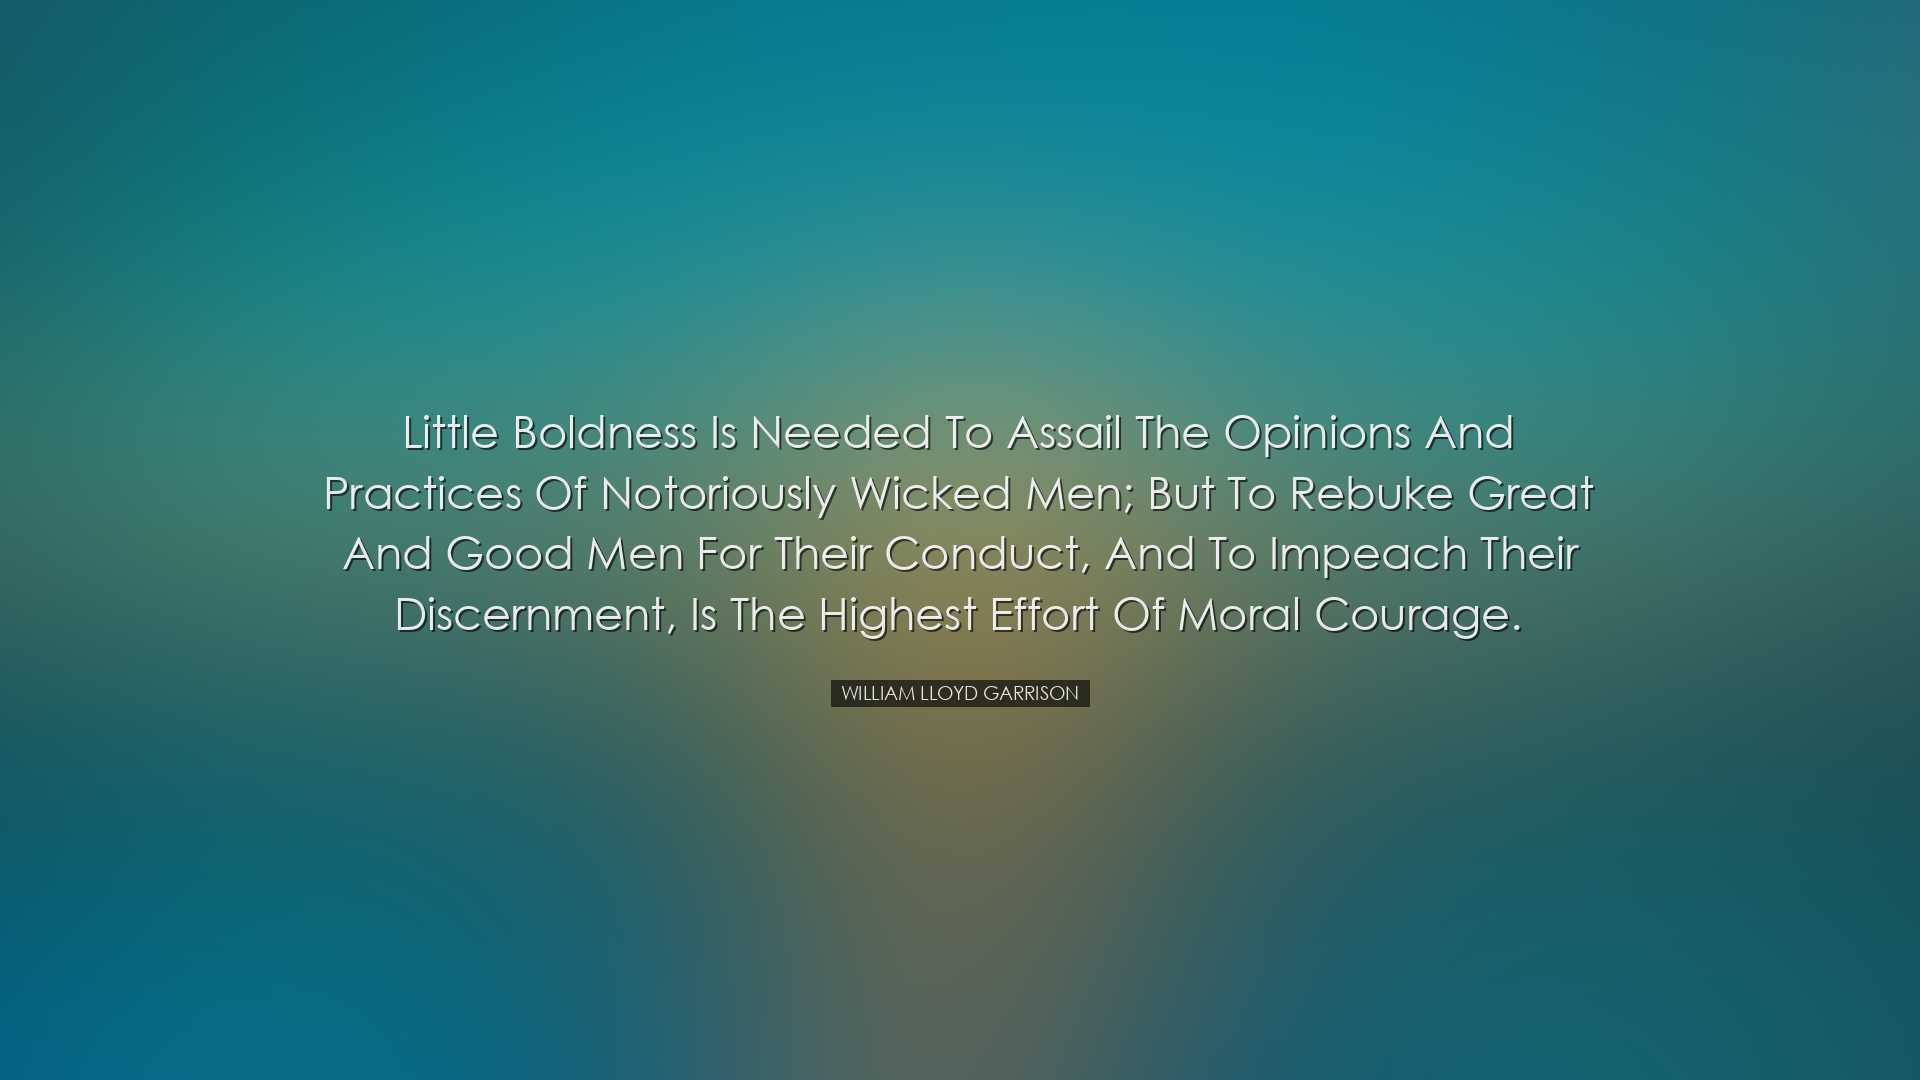 Little boldness is needed to assail the opinions and practices of